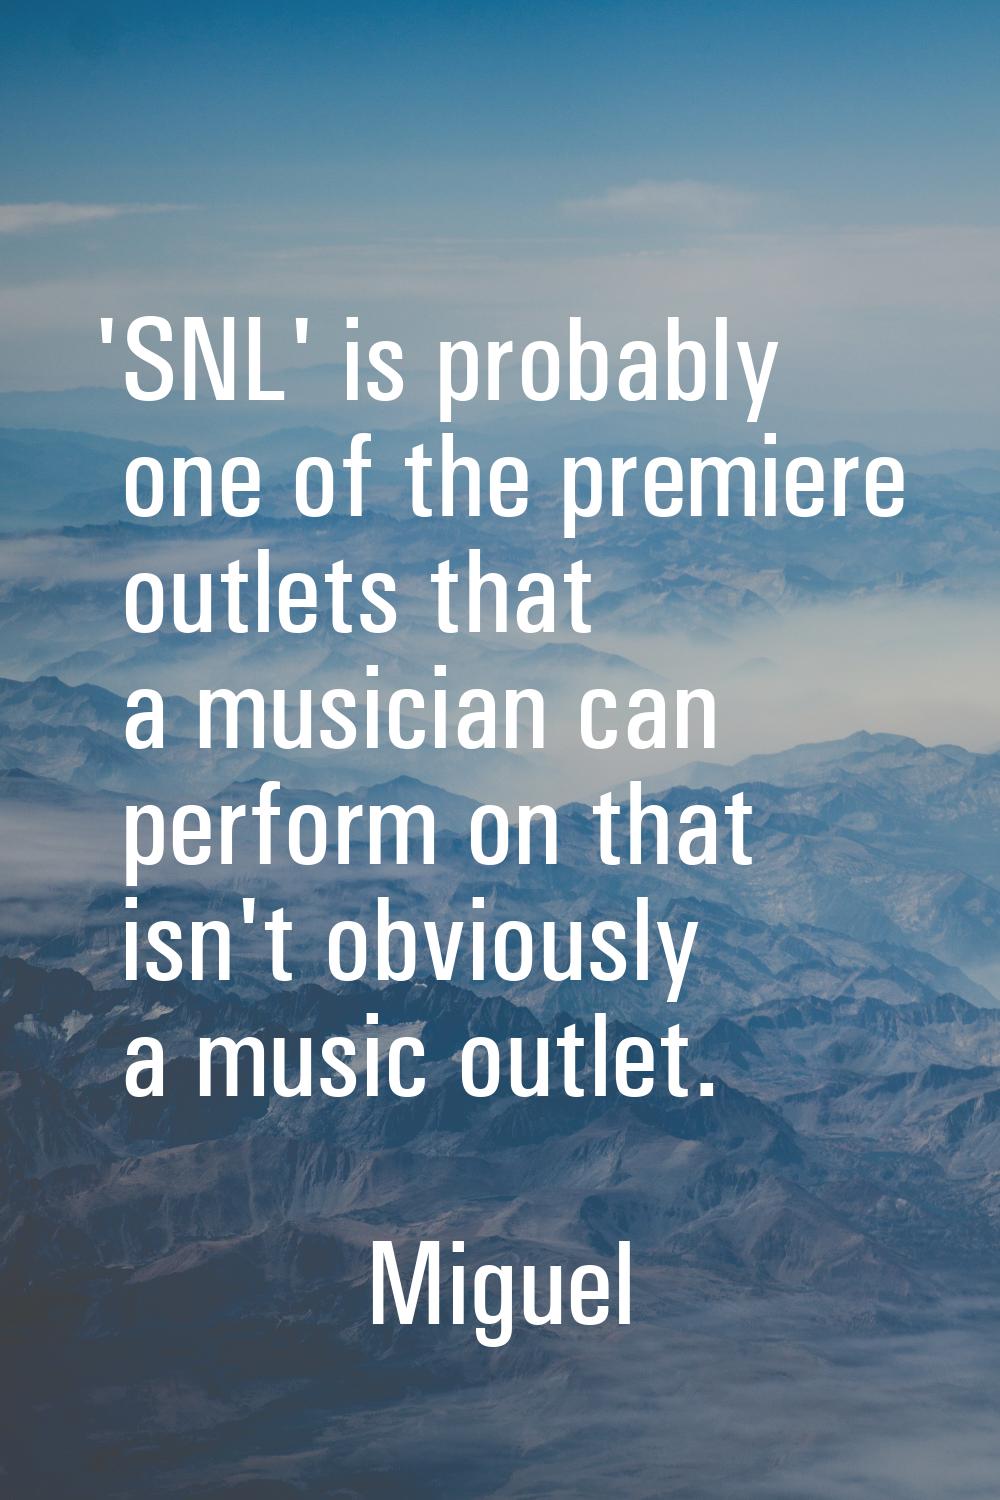 'SNL' is probably one of the premiere outlets that a musician can perform on that isn't obviously a